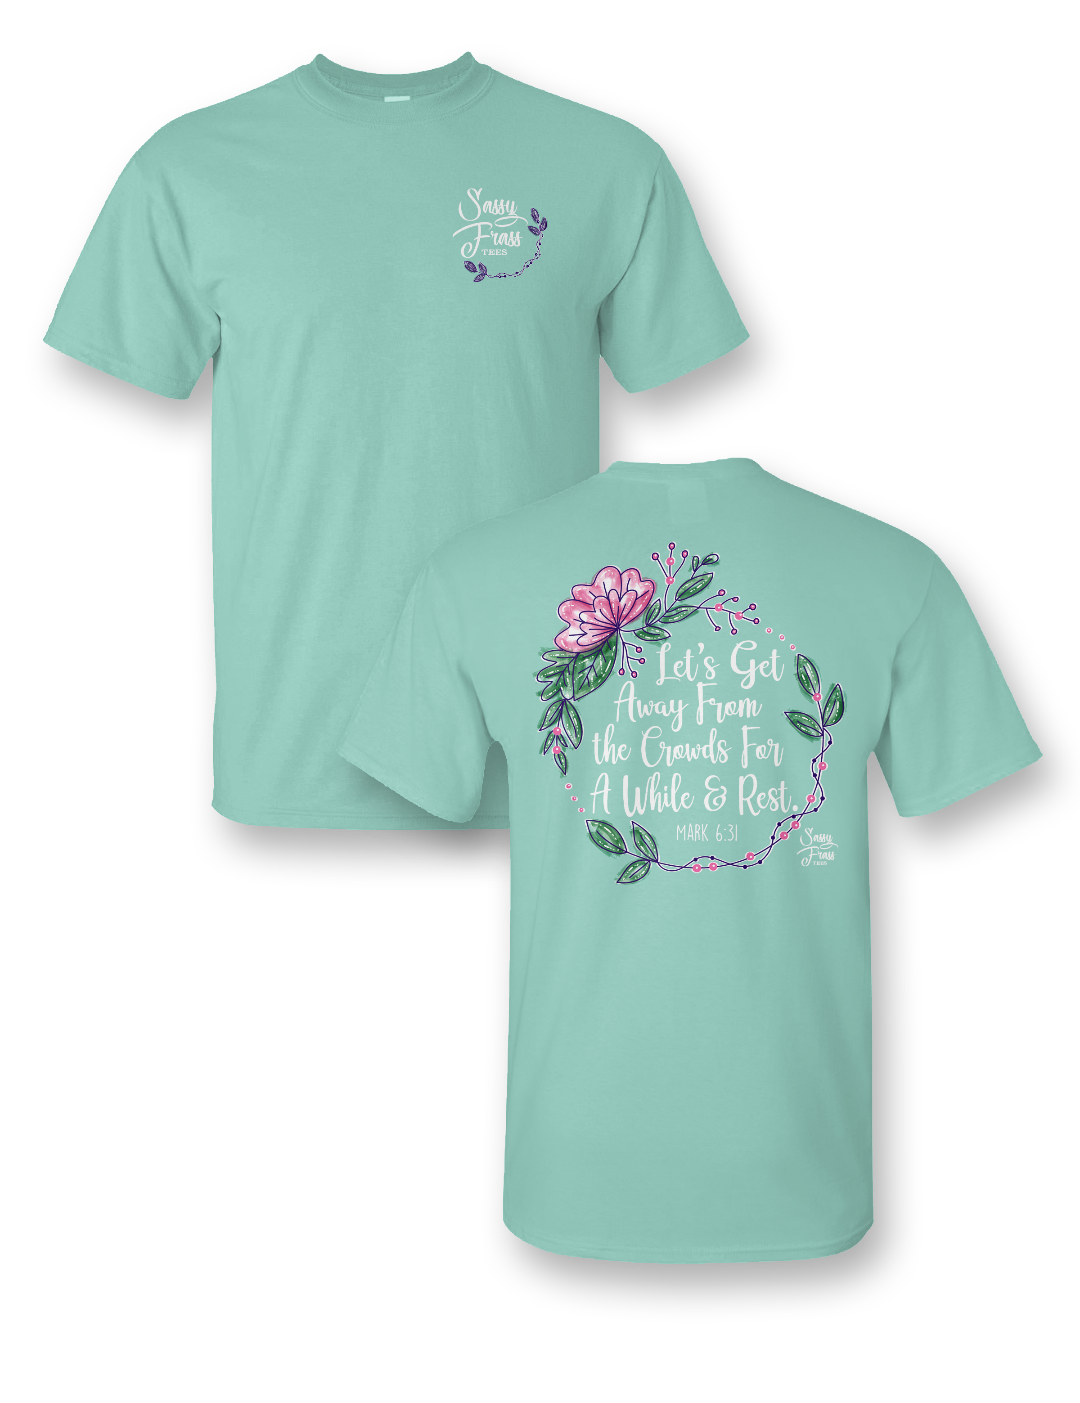 Sassy Frass Let's Get Away from the Crowds for Awhile & Rest Girlie Bright T Shirt